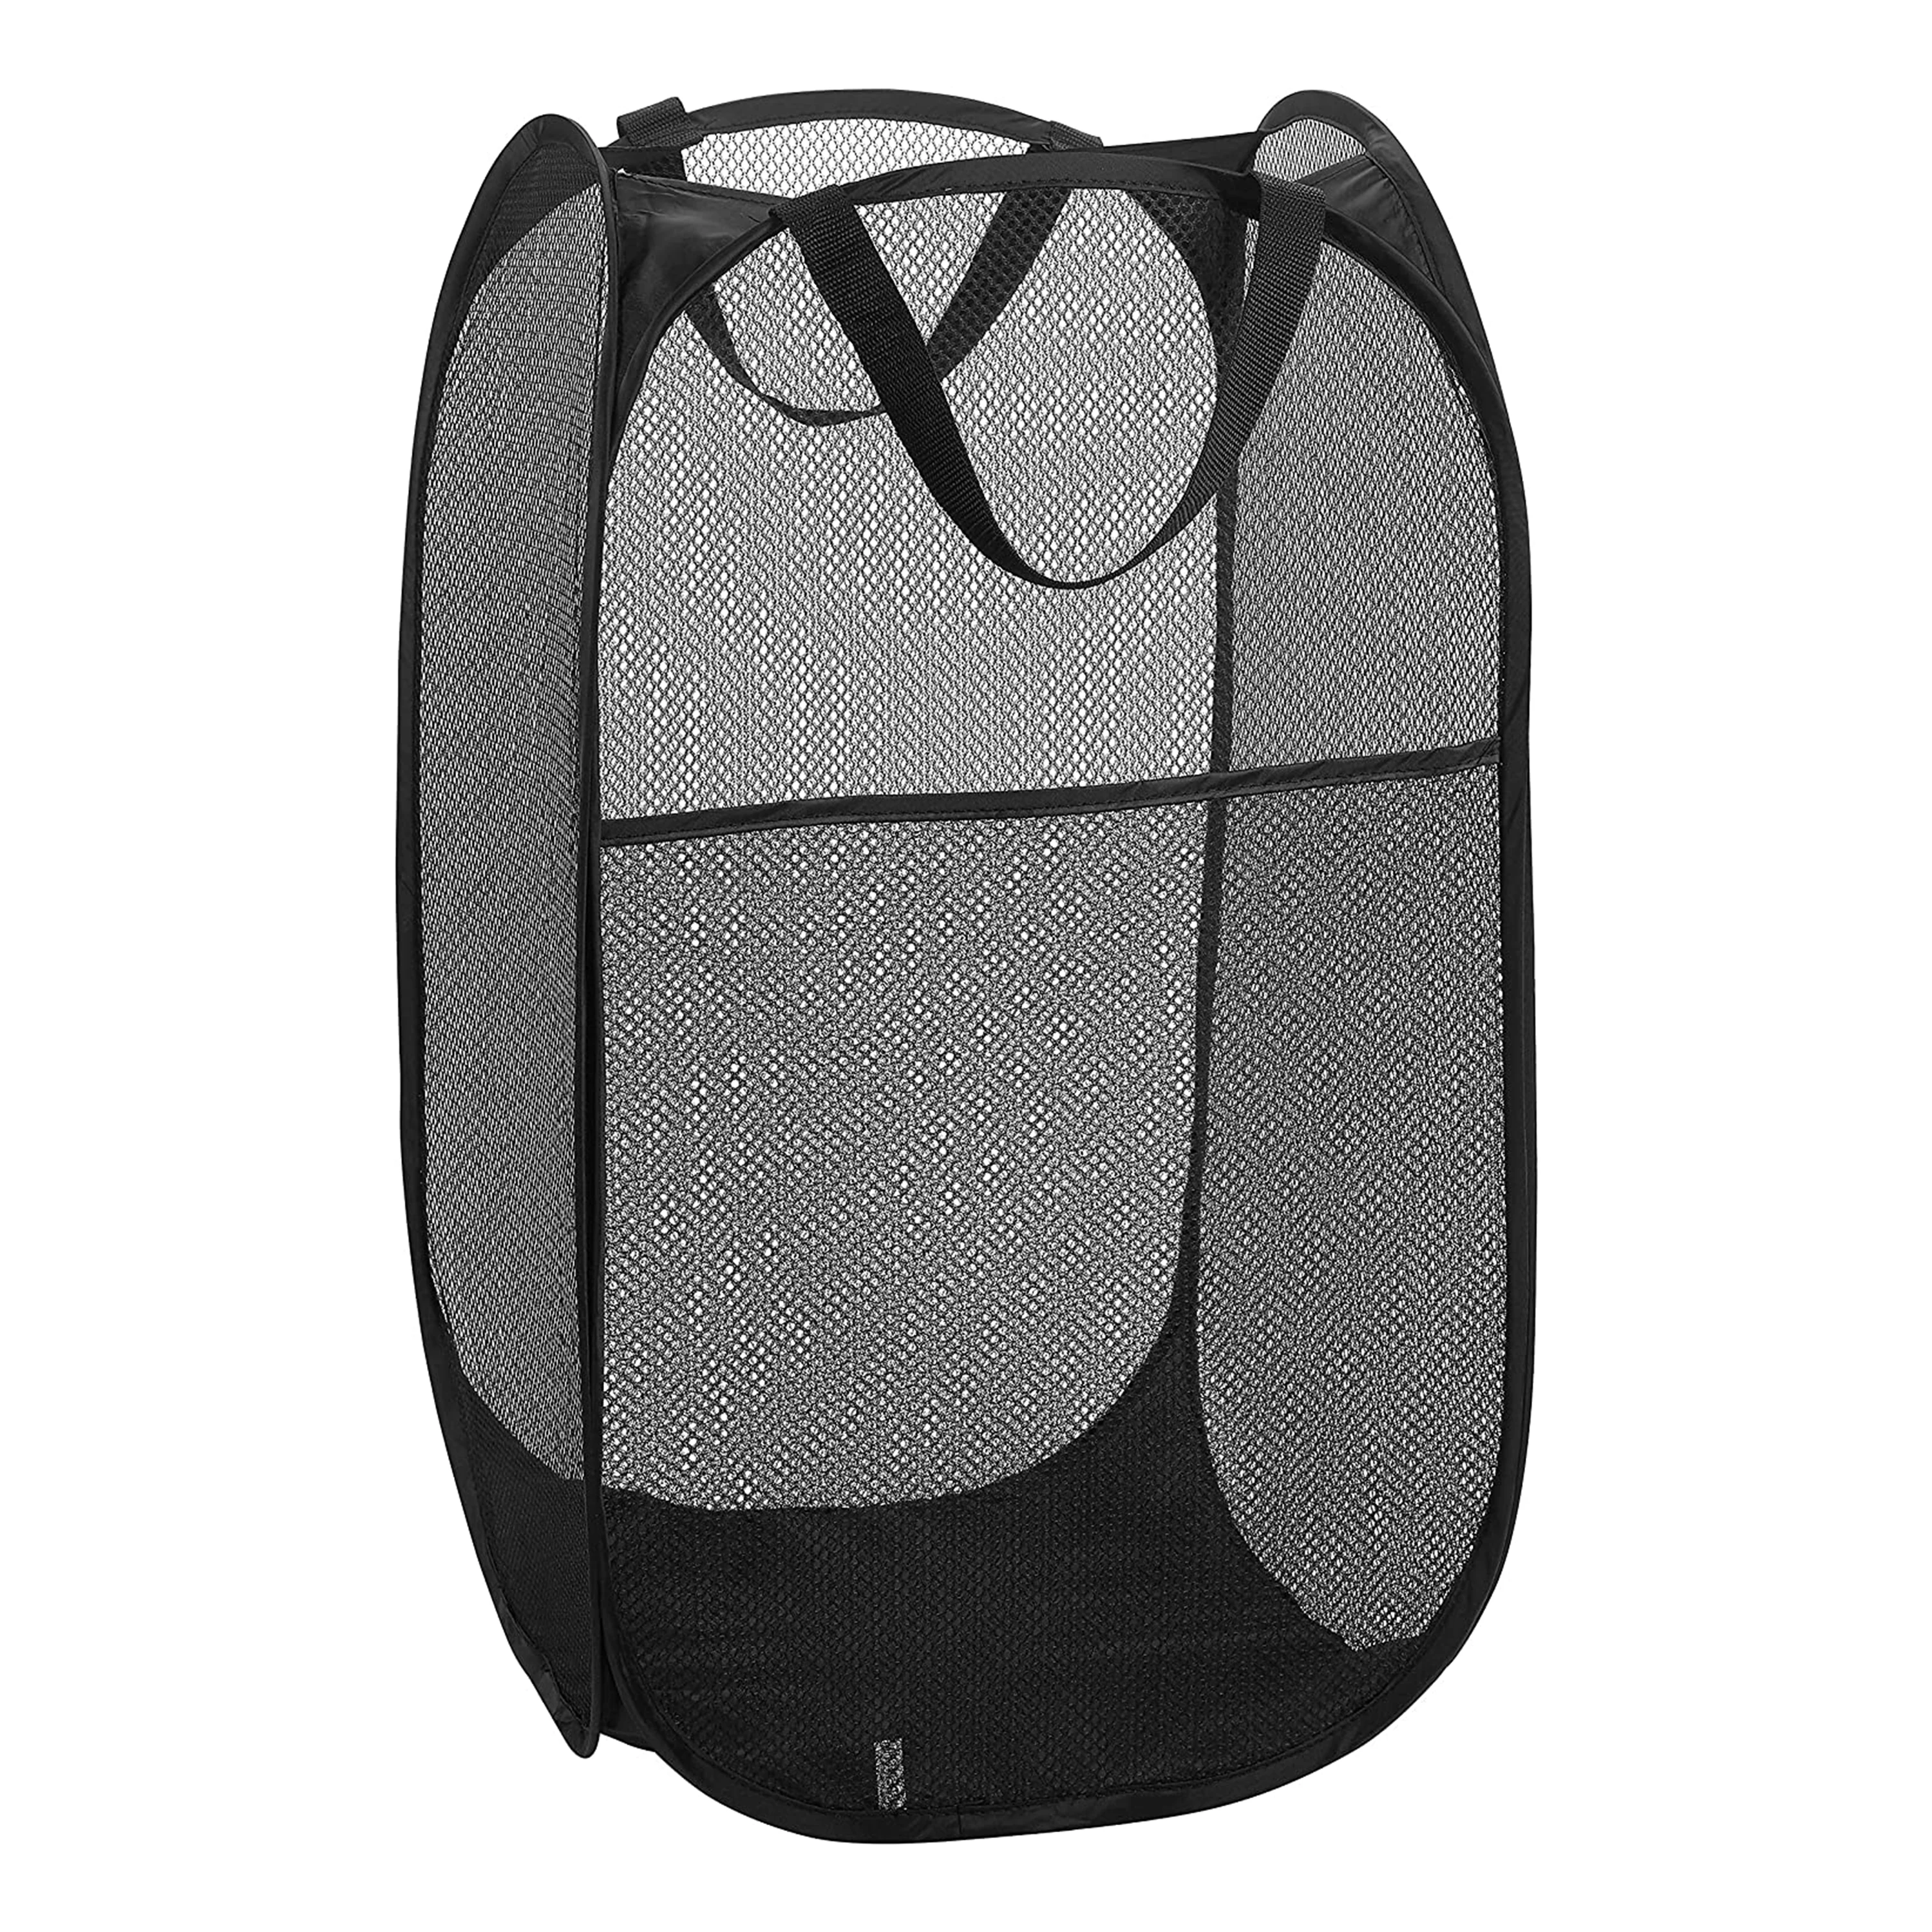 

OEM Mesh Popup Laundry Hamper - Portable, Collapsible for Storage and Easy to Open. Dirty Clothing Storage, baby toy basket, White/black/red/navy blue/custom